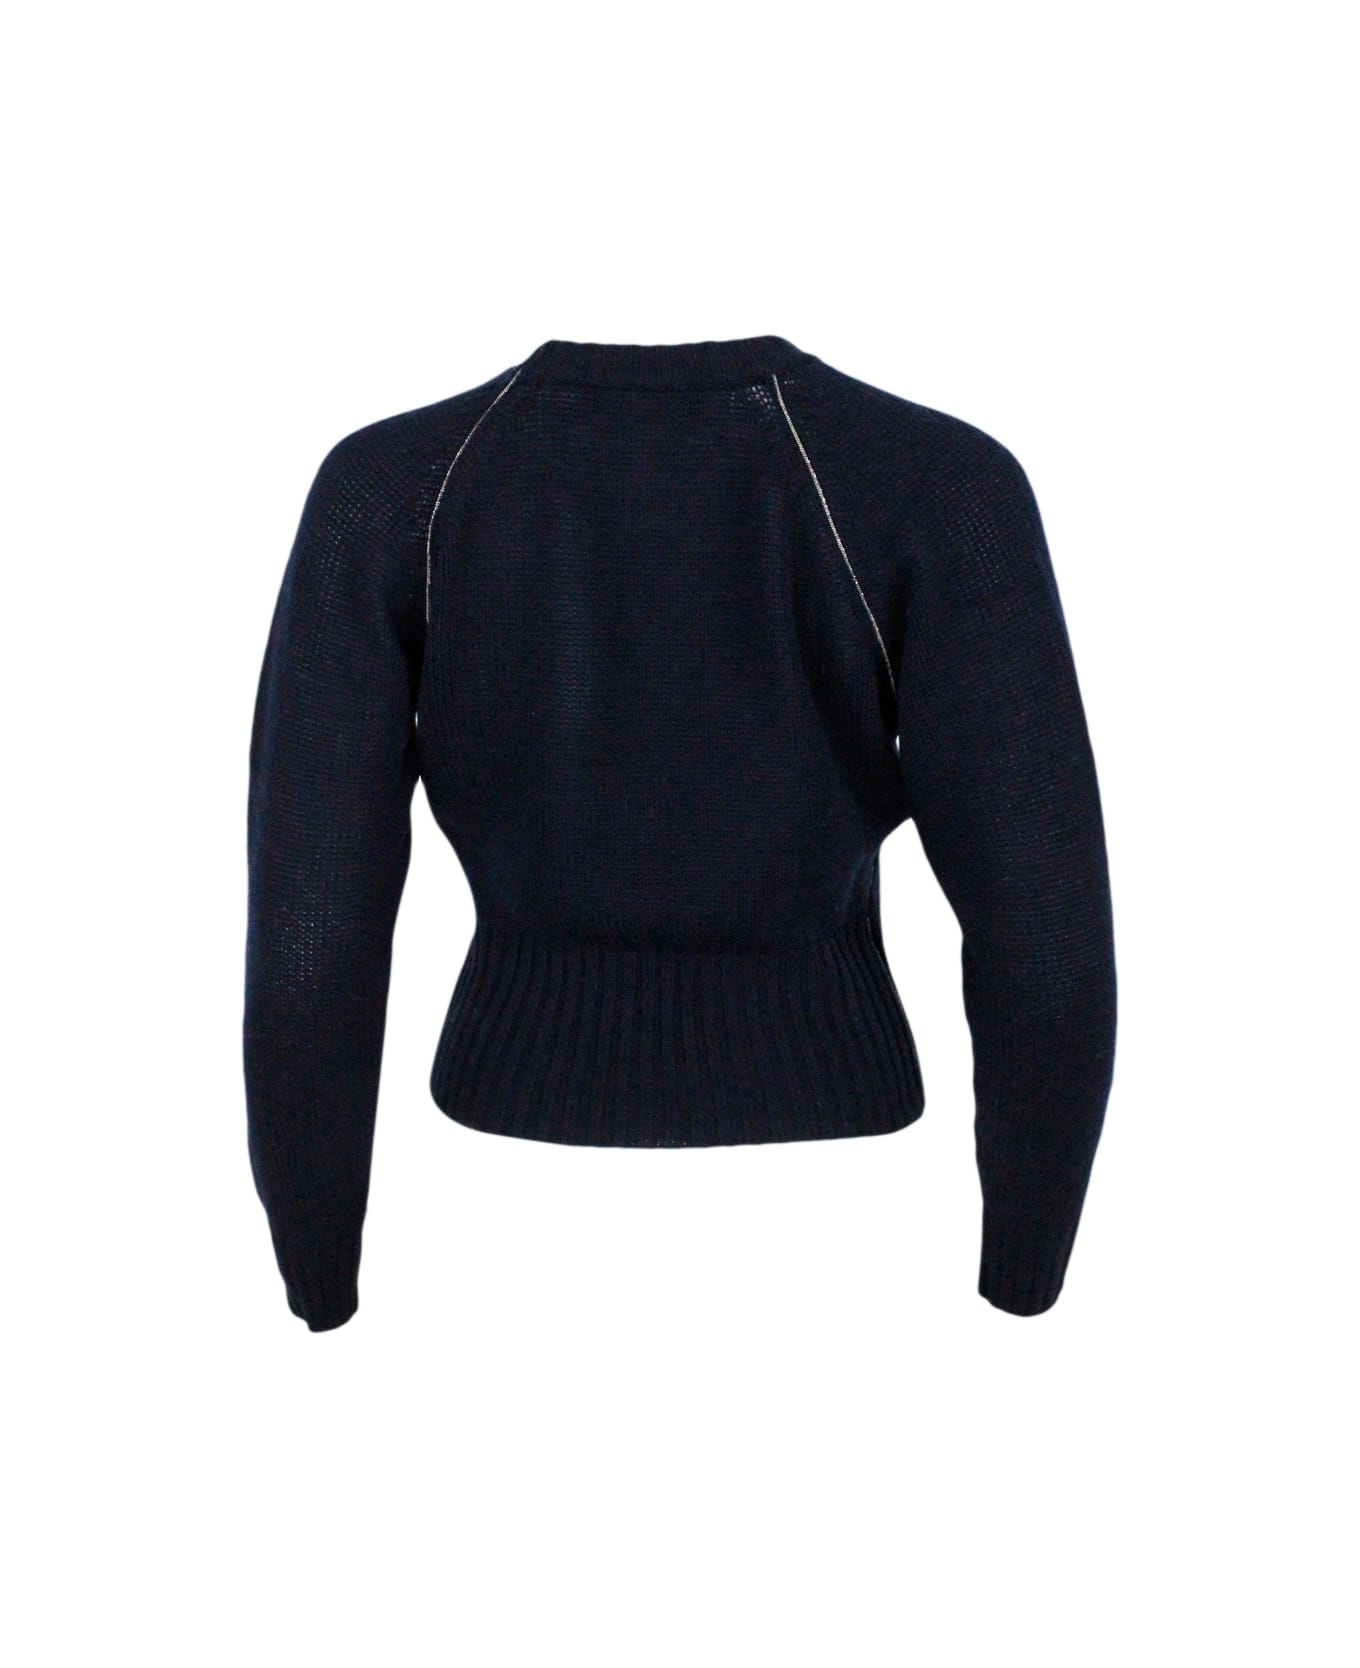 Fabiana Filippi Slim-fit Long-sleeved Cashmere Crew-neck Sweater With Raglan Sleeves Embellished With Rows Of Monili On The Armhole - Blu